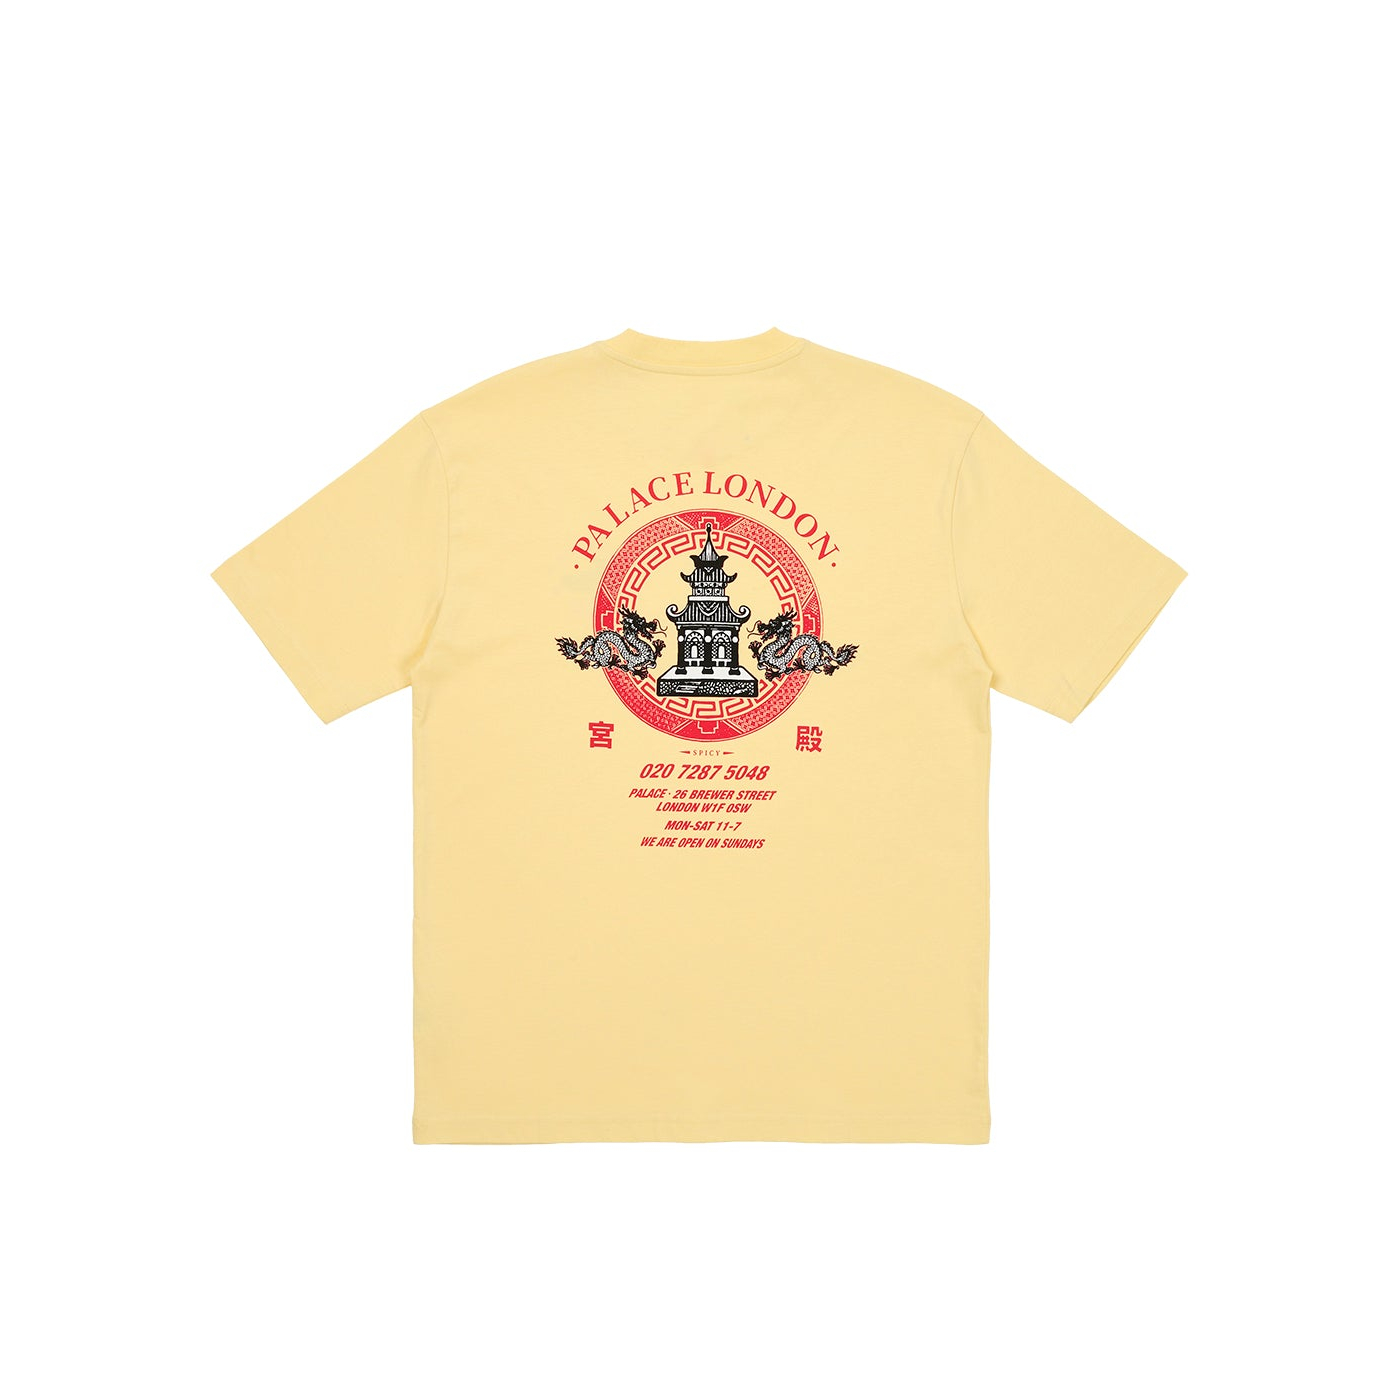 Thumbnail FORTUNATE T-SHIRT MELLOW YELLOW one color